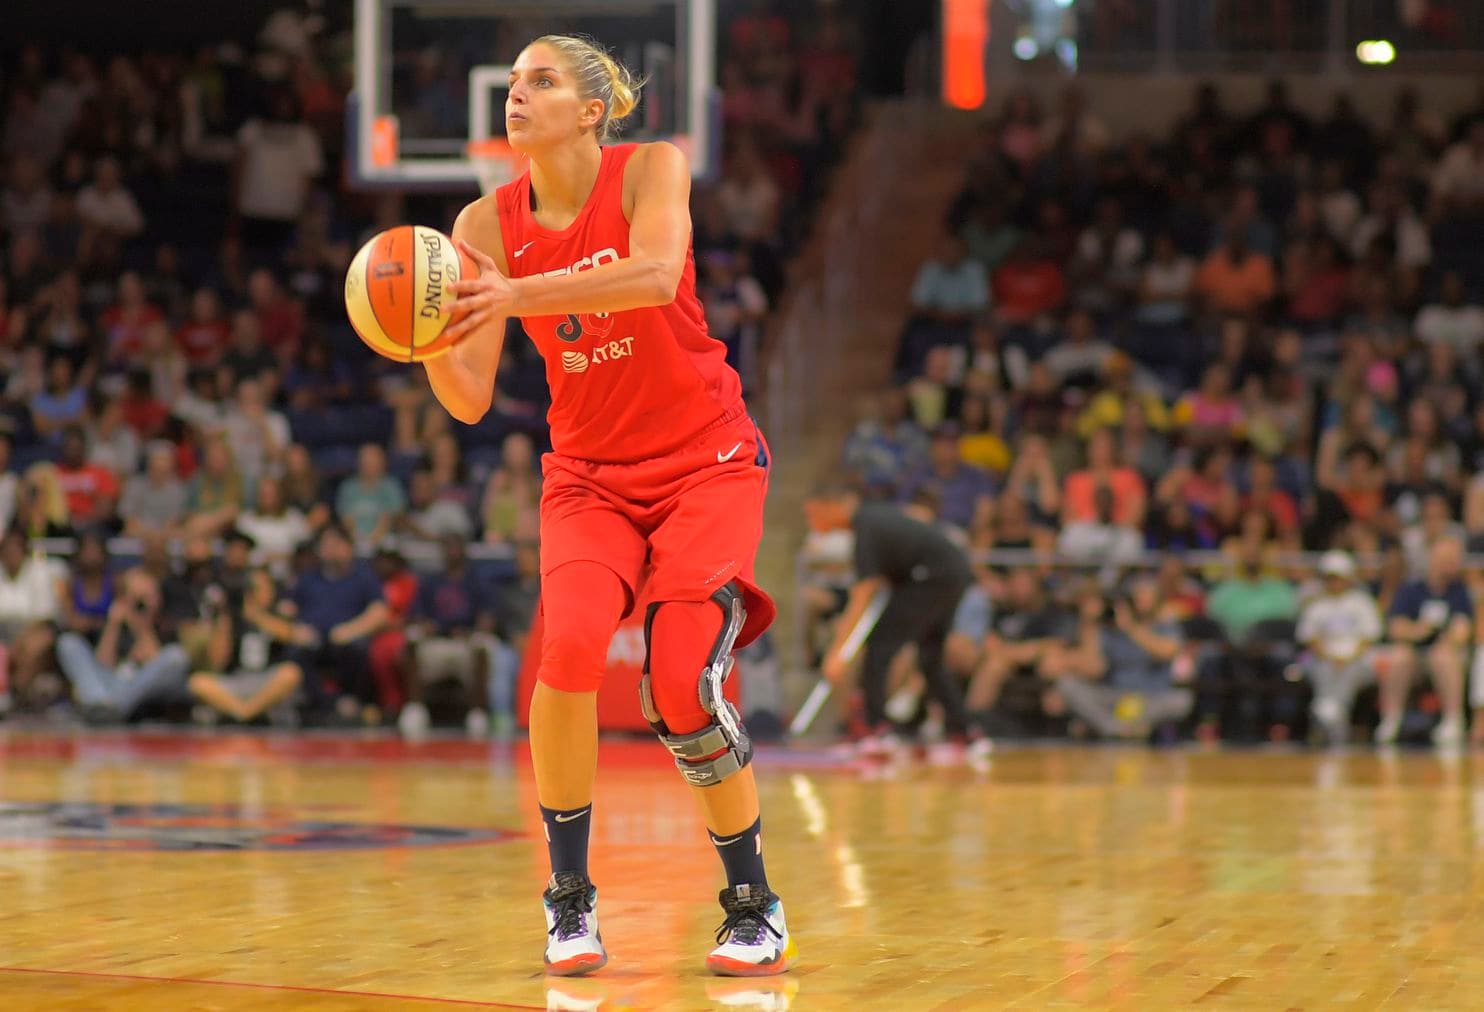 https://www.washingtonpost.com/sports/2019/07/21/elena-delle-donne-face-mask-all-does-what-mystics-need-more-lopsided-win/?noredirect=on